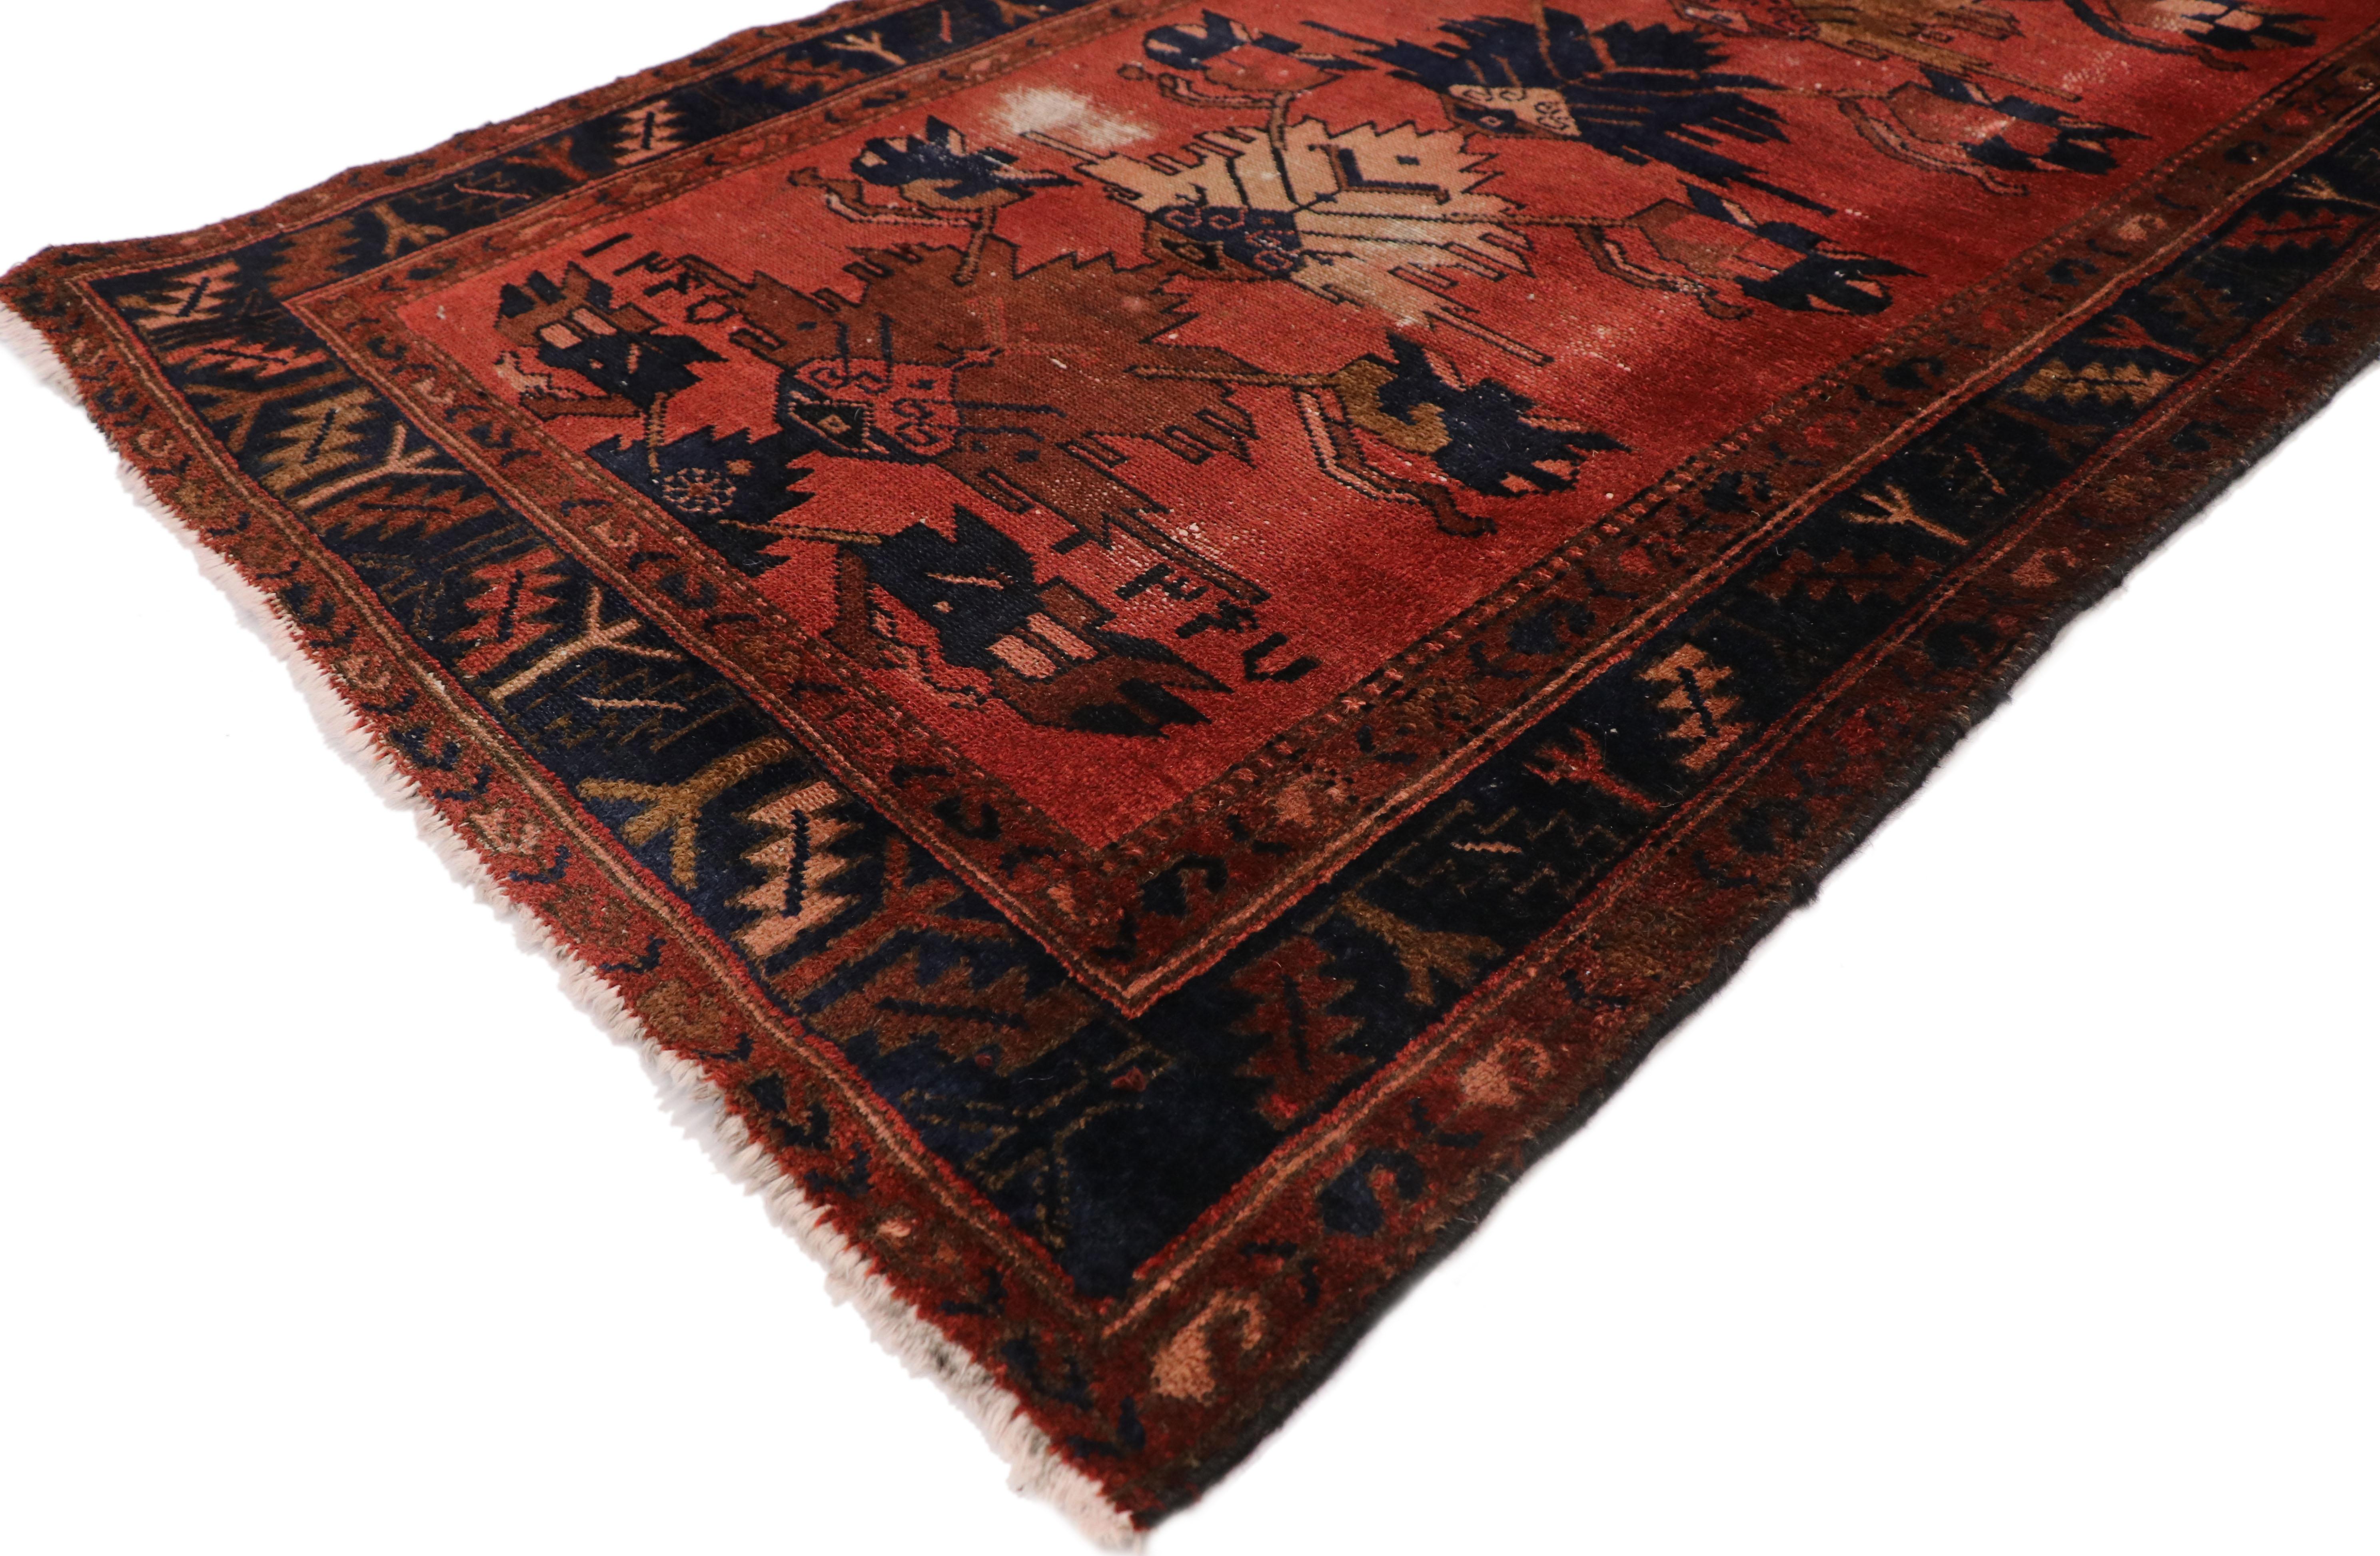 77409 distressed antique Persian Hamadan runner with rustic English Manor Tudor style. With its warm, rich colors and ornate detailing, this hand knotted wool distressed antique Persian Hamadan runner is poised to impress. It features naturalistic